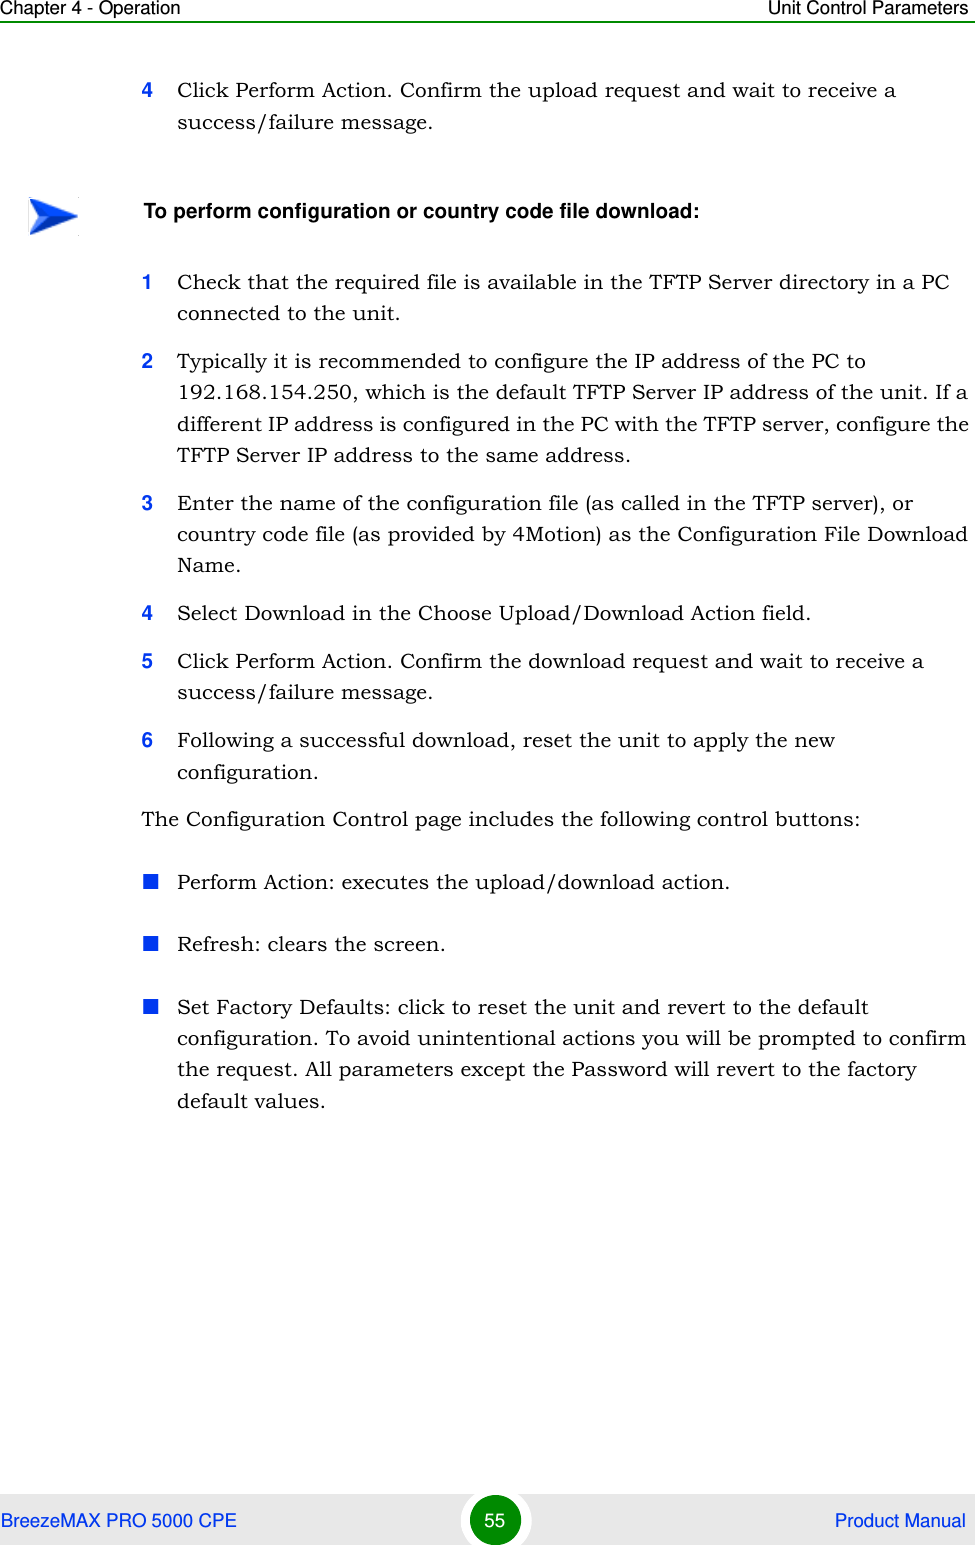 Chapter 4 - Operation Unit Control ParametersBreezeMAX PRO 5000 CPE 55  Product Manual4Click Perform Action. Confirm the upload request and wait to receive a success/failure message.1Check that the required file is available in the TFTP Server directory in a PC connected to the unit.2Typically it is recommended to configure the IP address of the PC to 192.168.154.250, which is the default TFTP Server IP address of the unit. If a different IP address is configured in the PC with the TFTP server, configure the TFTP Server IP address to the same address.3Enter the name of the configuration file (as called in the TFTP server), or country code file (as provided by 4Motion) as the Configuration File Download Name.4Select Download in the Choose Upload/Download Action field.5Click Perform Action. Confirm the download request and wait to receive a success/failure message.6Following a successful download, reset the unit to apply the new configuration.The Configuration Control page includes the following control buttons:Perform Action: executes the upload/download action.Refresh: clears the screen.Set Factory Defaults: click to reset the unit and revert to the default configuration. To avoid unintentional actions you will be prompted to confirm the request. All parameters except the Password will revert to the factory default values.To perform configuration or country code file download: